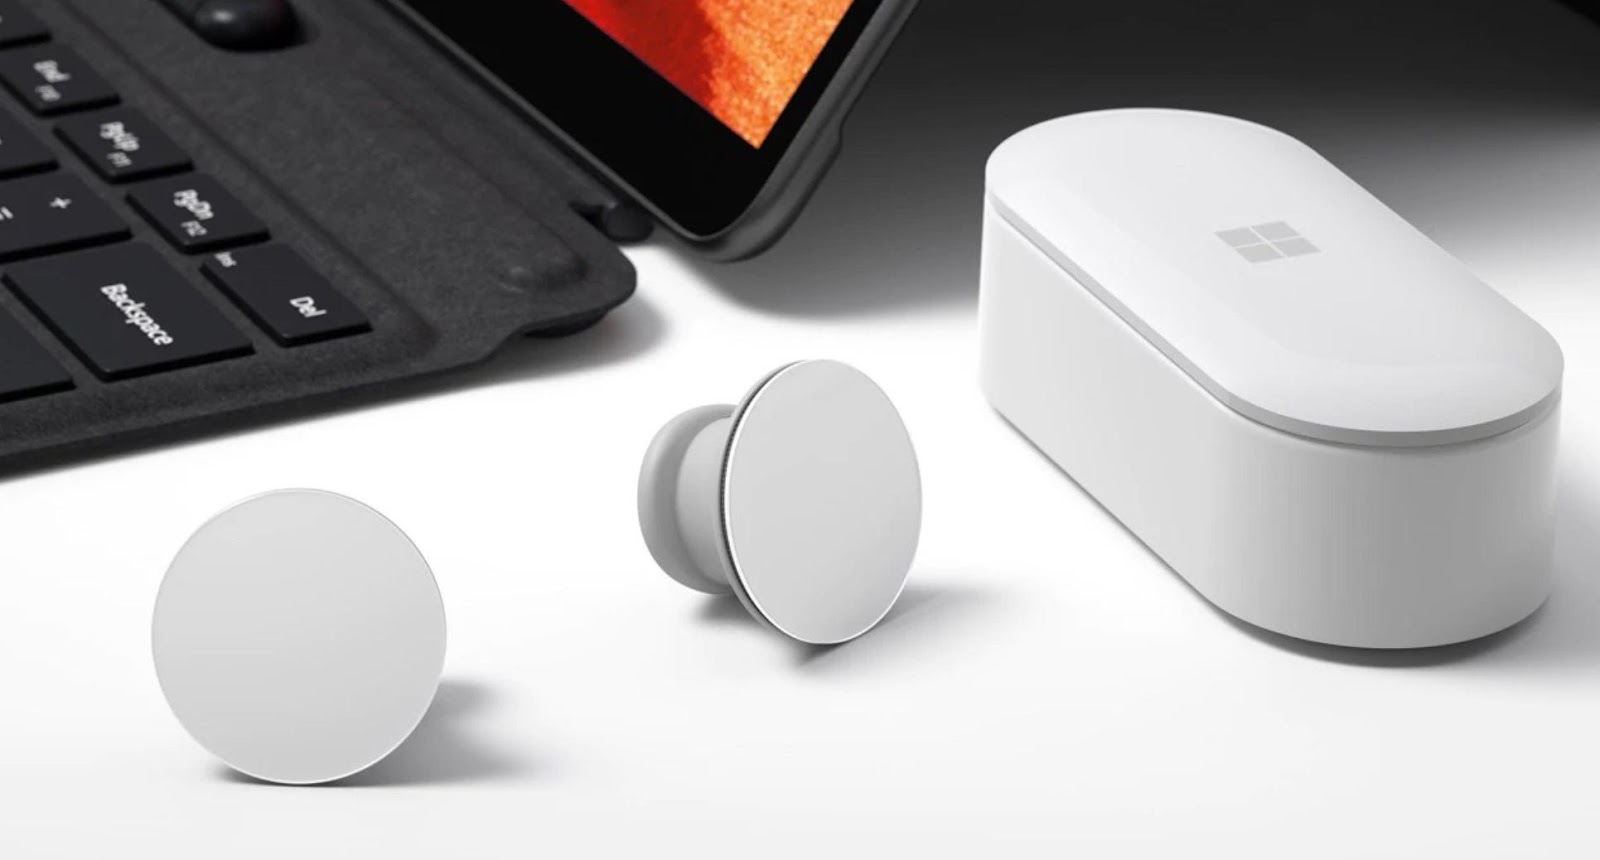 The New Microsoft Surface Earbuds Are Here